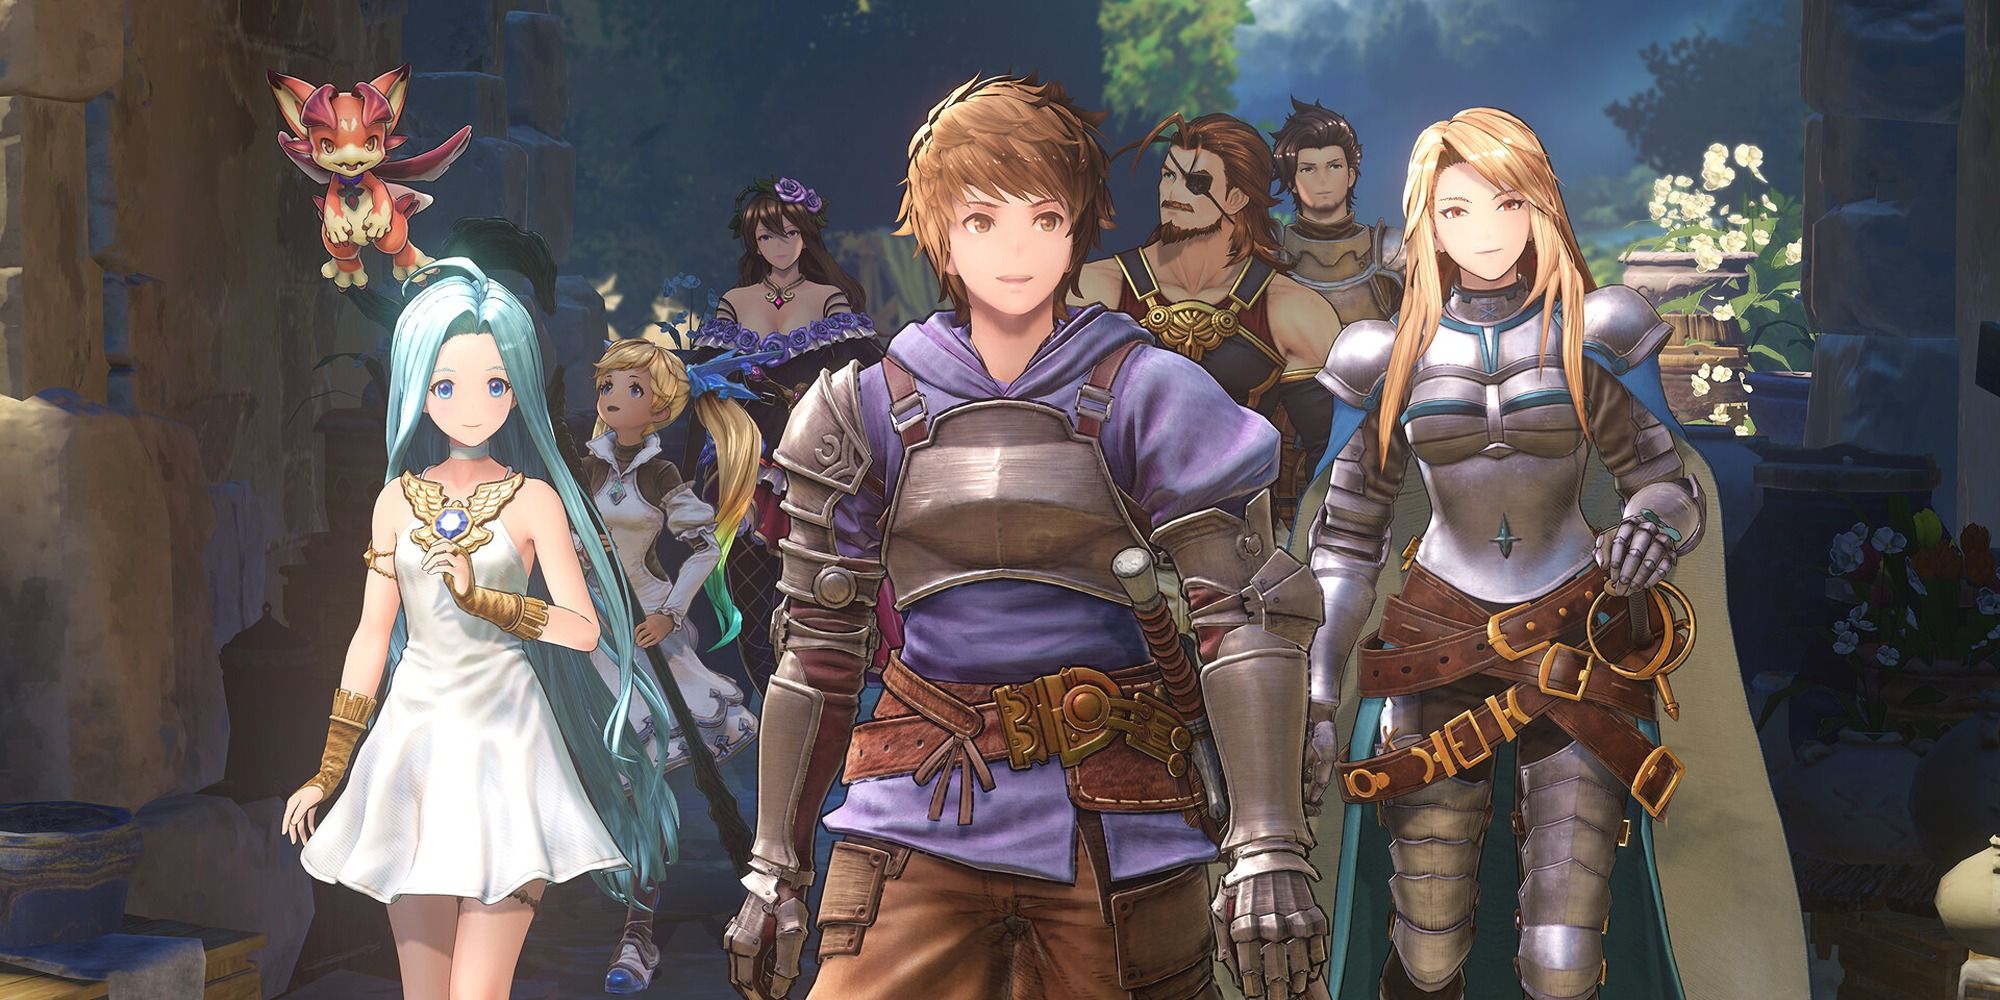 The party is on the adventure in Granblue Fantasy: Relink